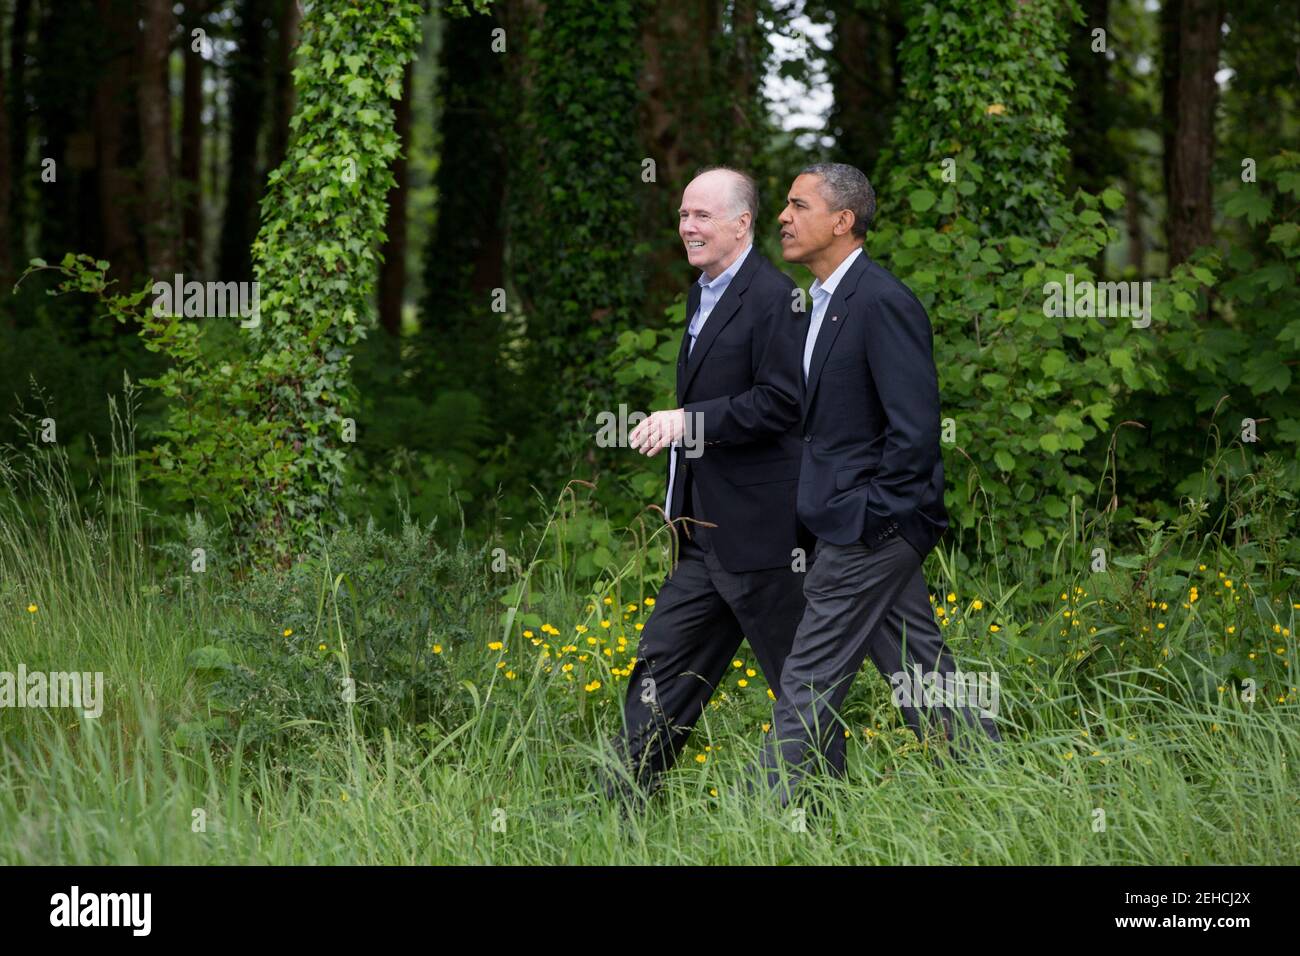 President Barack Obama walks with National Security Advisor Tom Donilon on the grounds of Lough Erne Resort at the conclusion of the G8 Summit in Enniskillen, Northern Ireland, June 18, 2013. Stock Photo